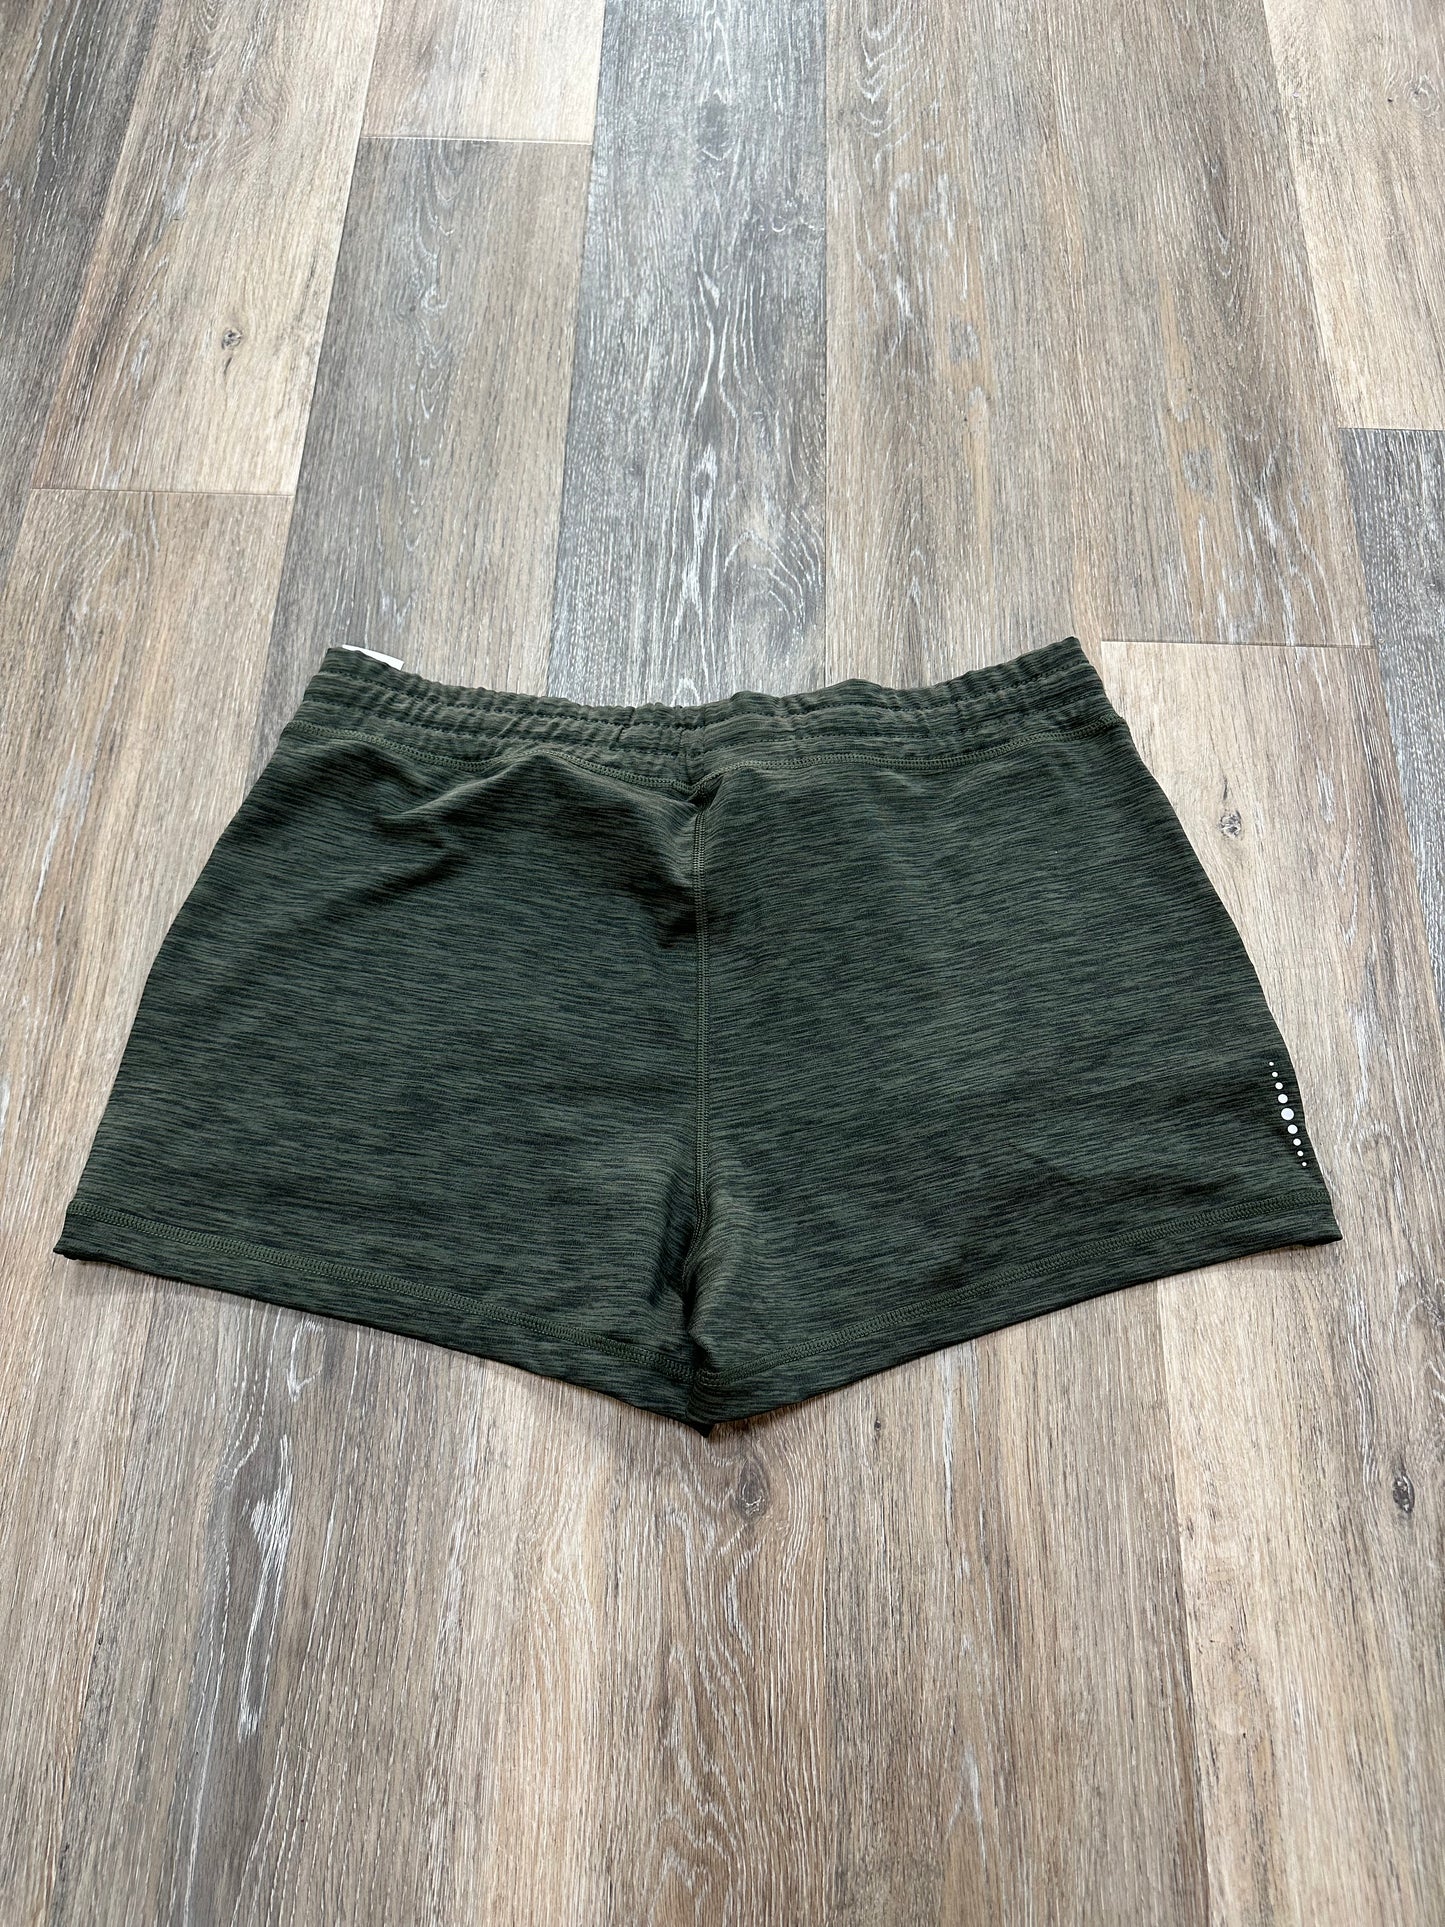 Athletic Shorts By Title Nine  Size: L